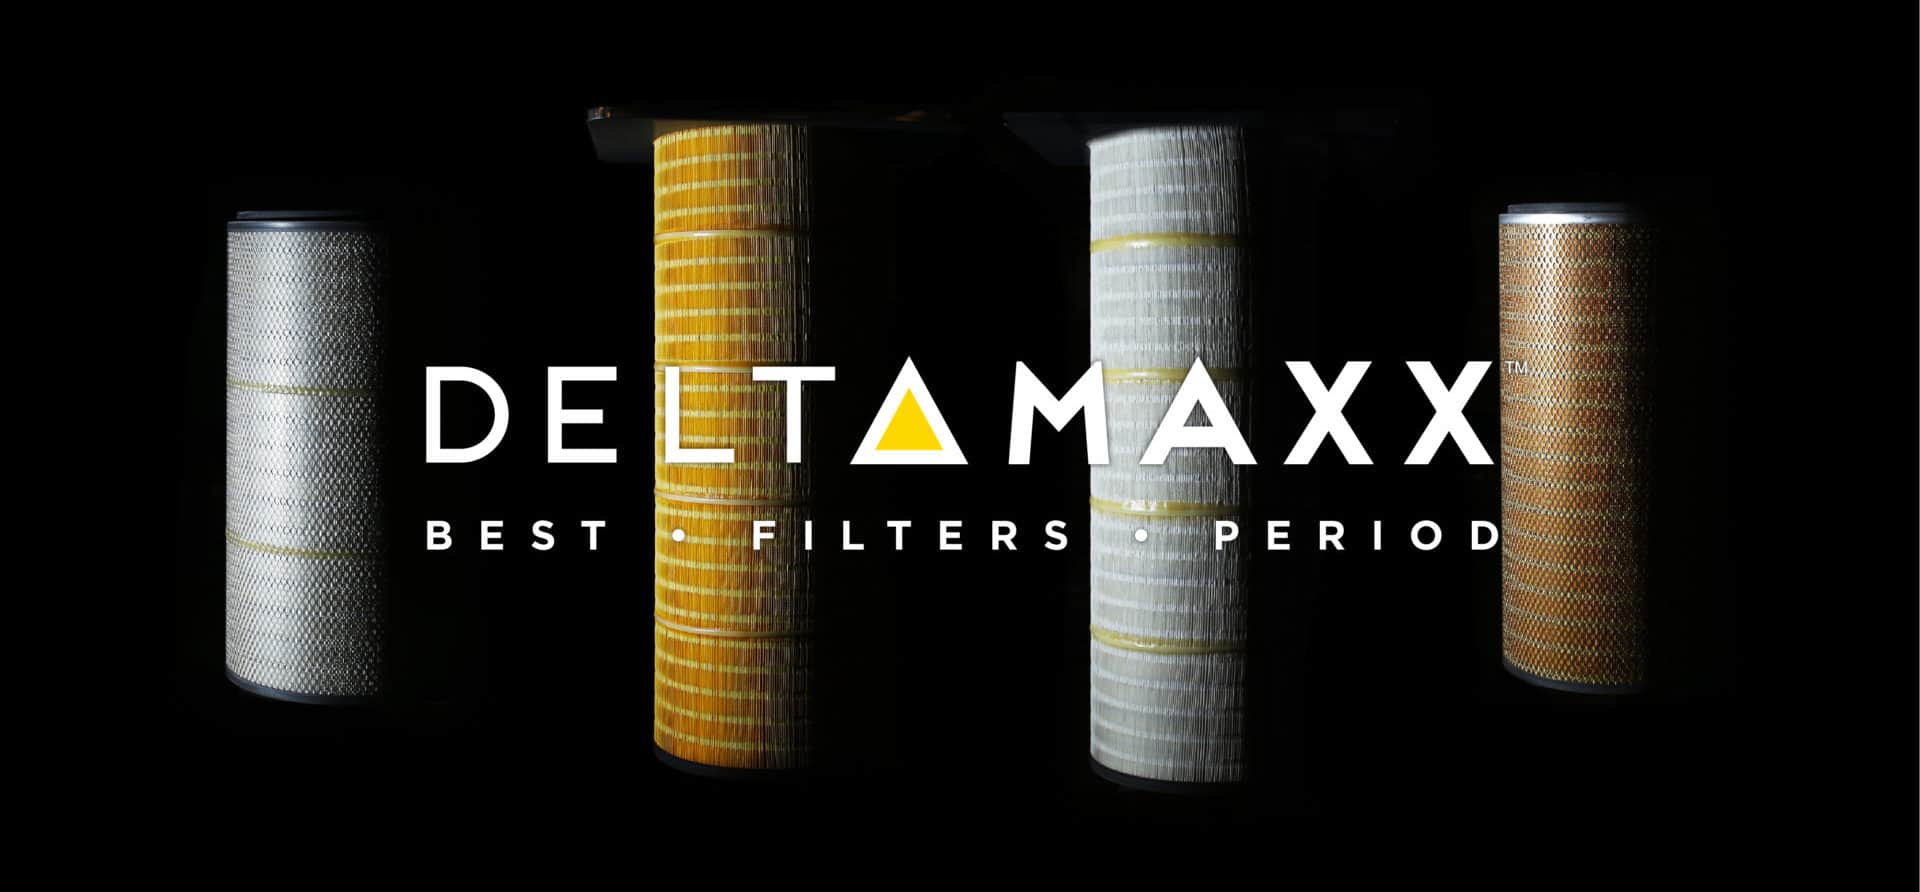 Use only DELTAMAXX replacement filters for your CMAXX Laser fume extractor 